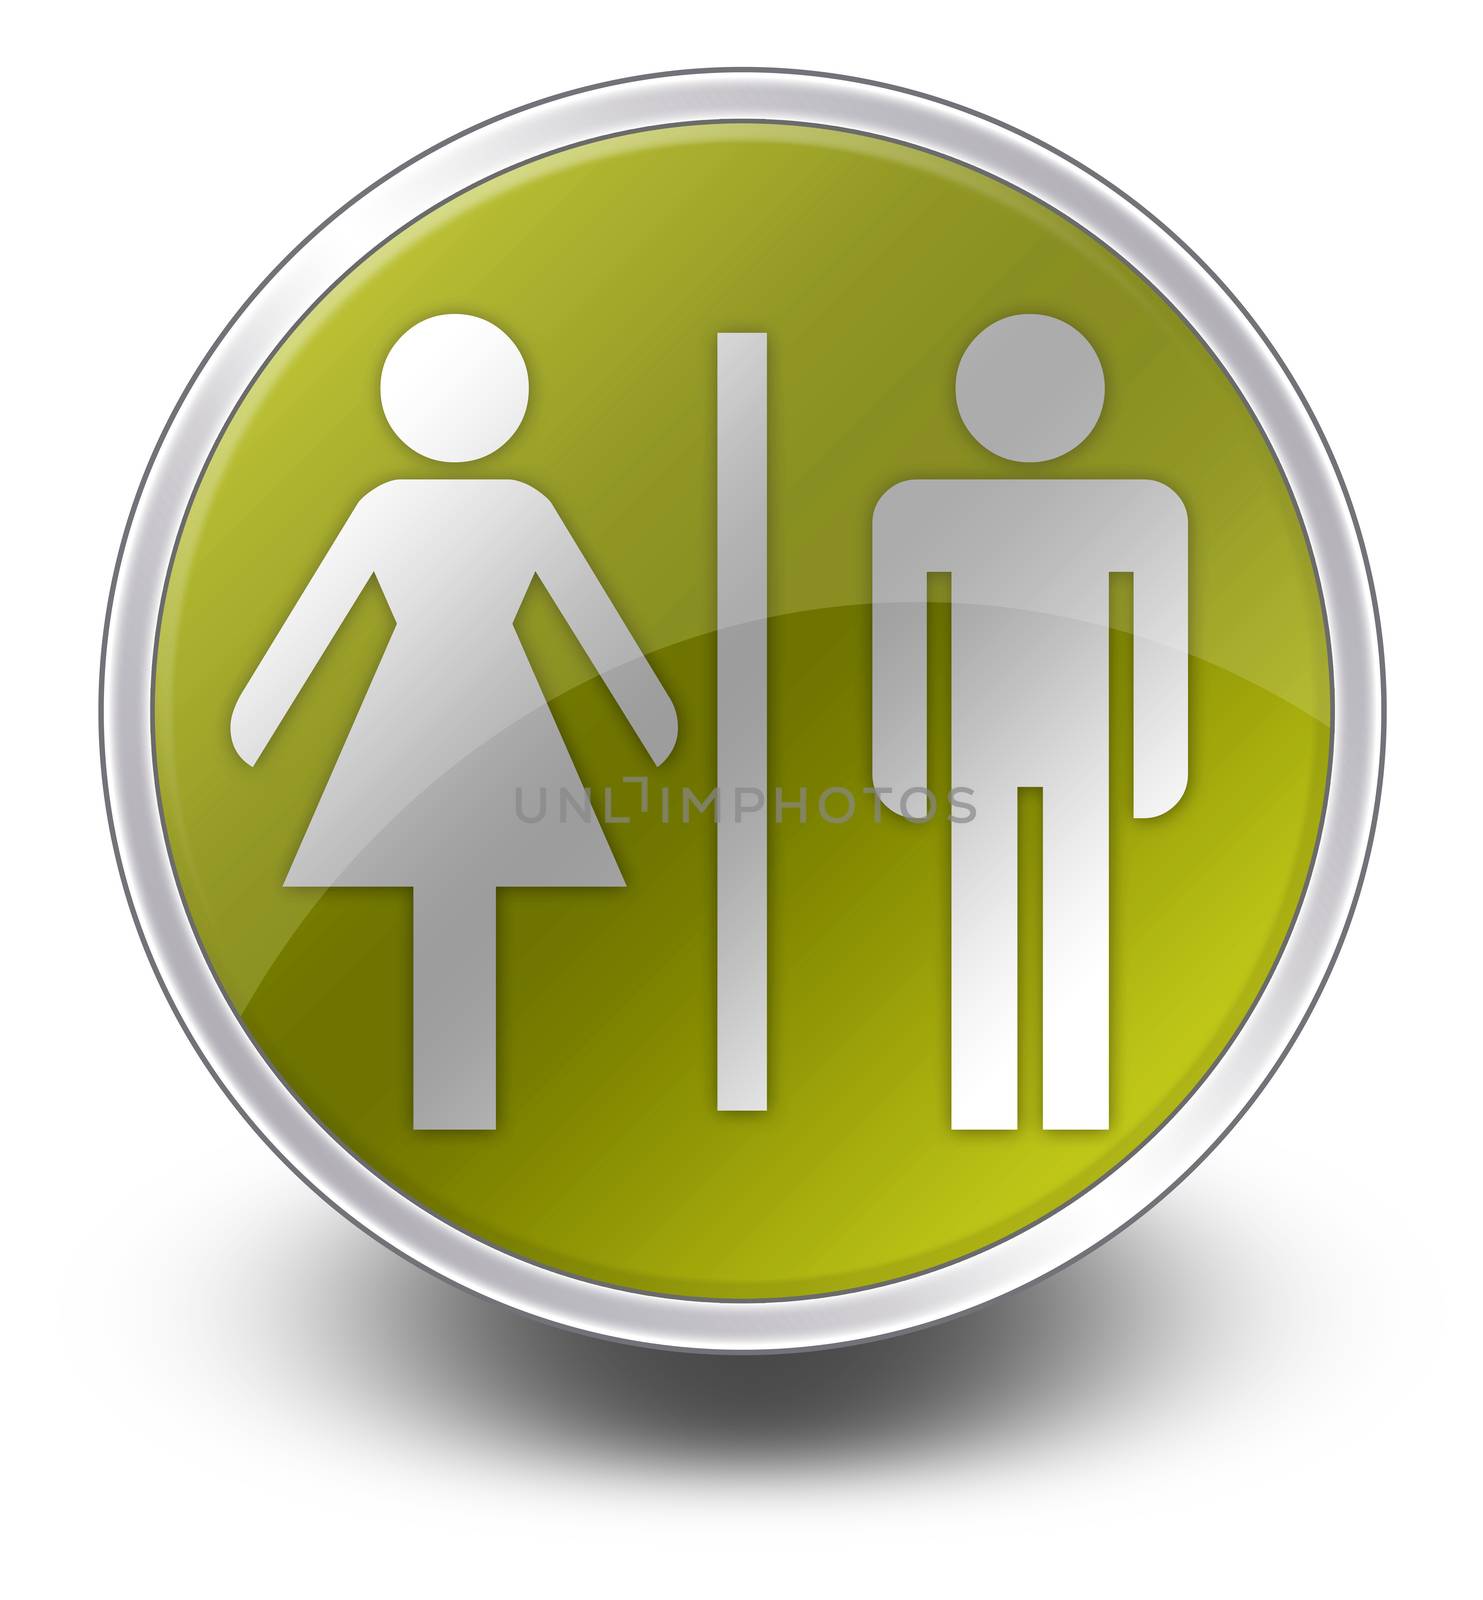 Icon, Button, Pictogram with Restrooms symbol